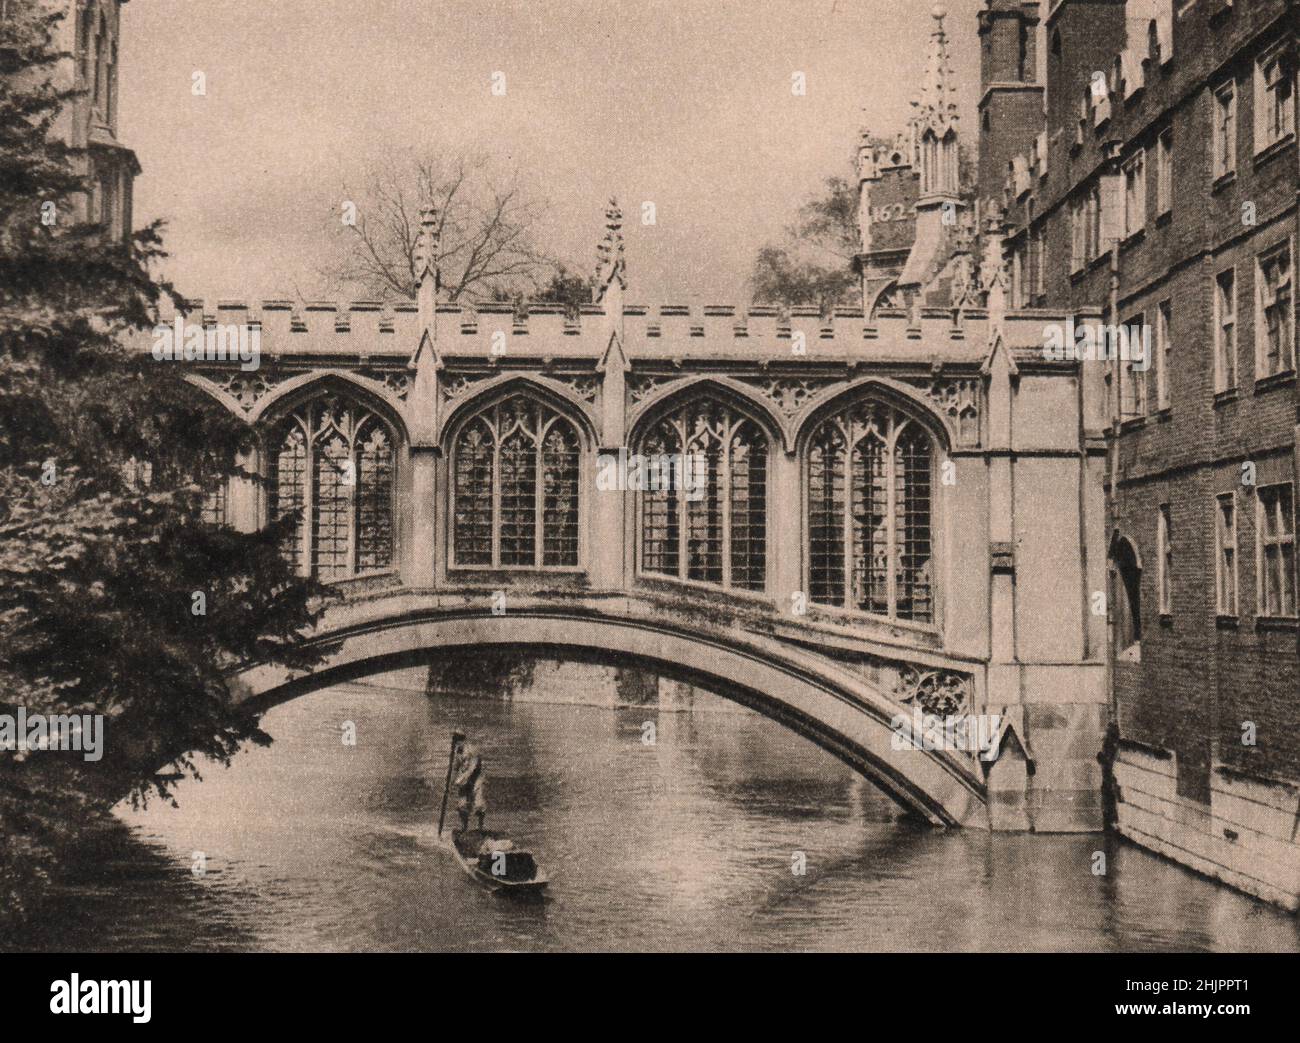 This bridge over the Cam, called the 'Bridge of Sighs'  joins two courts of St. John's College. Cambridge (1923) Stock Photo